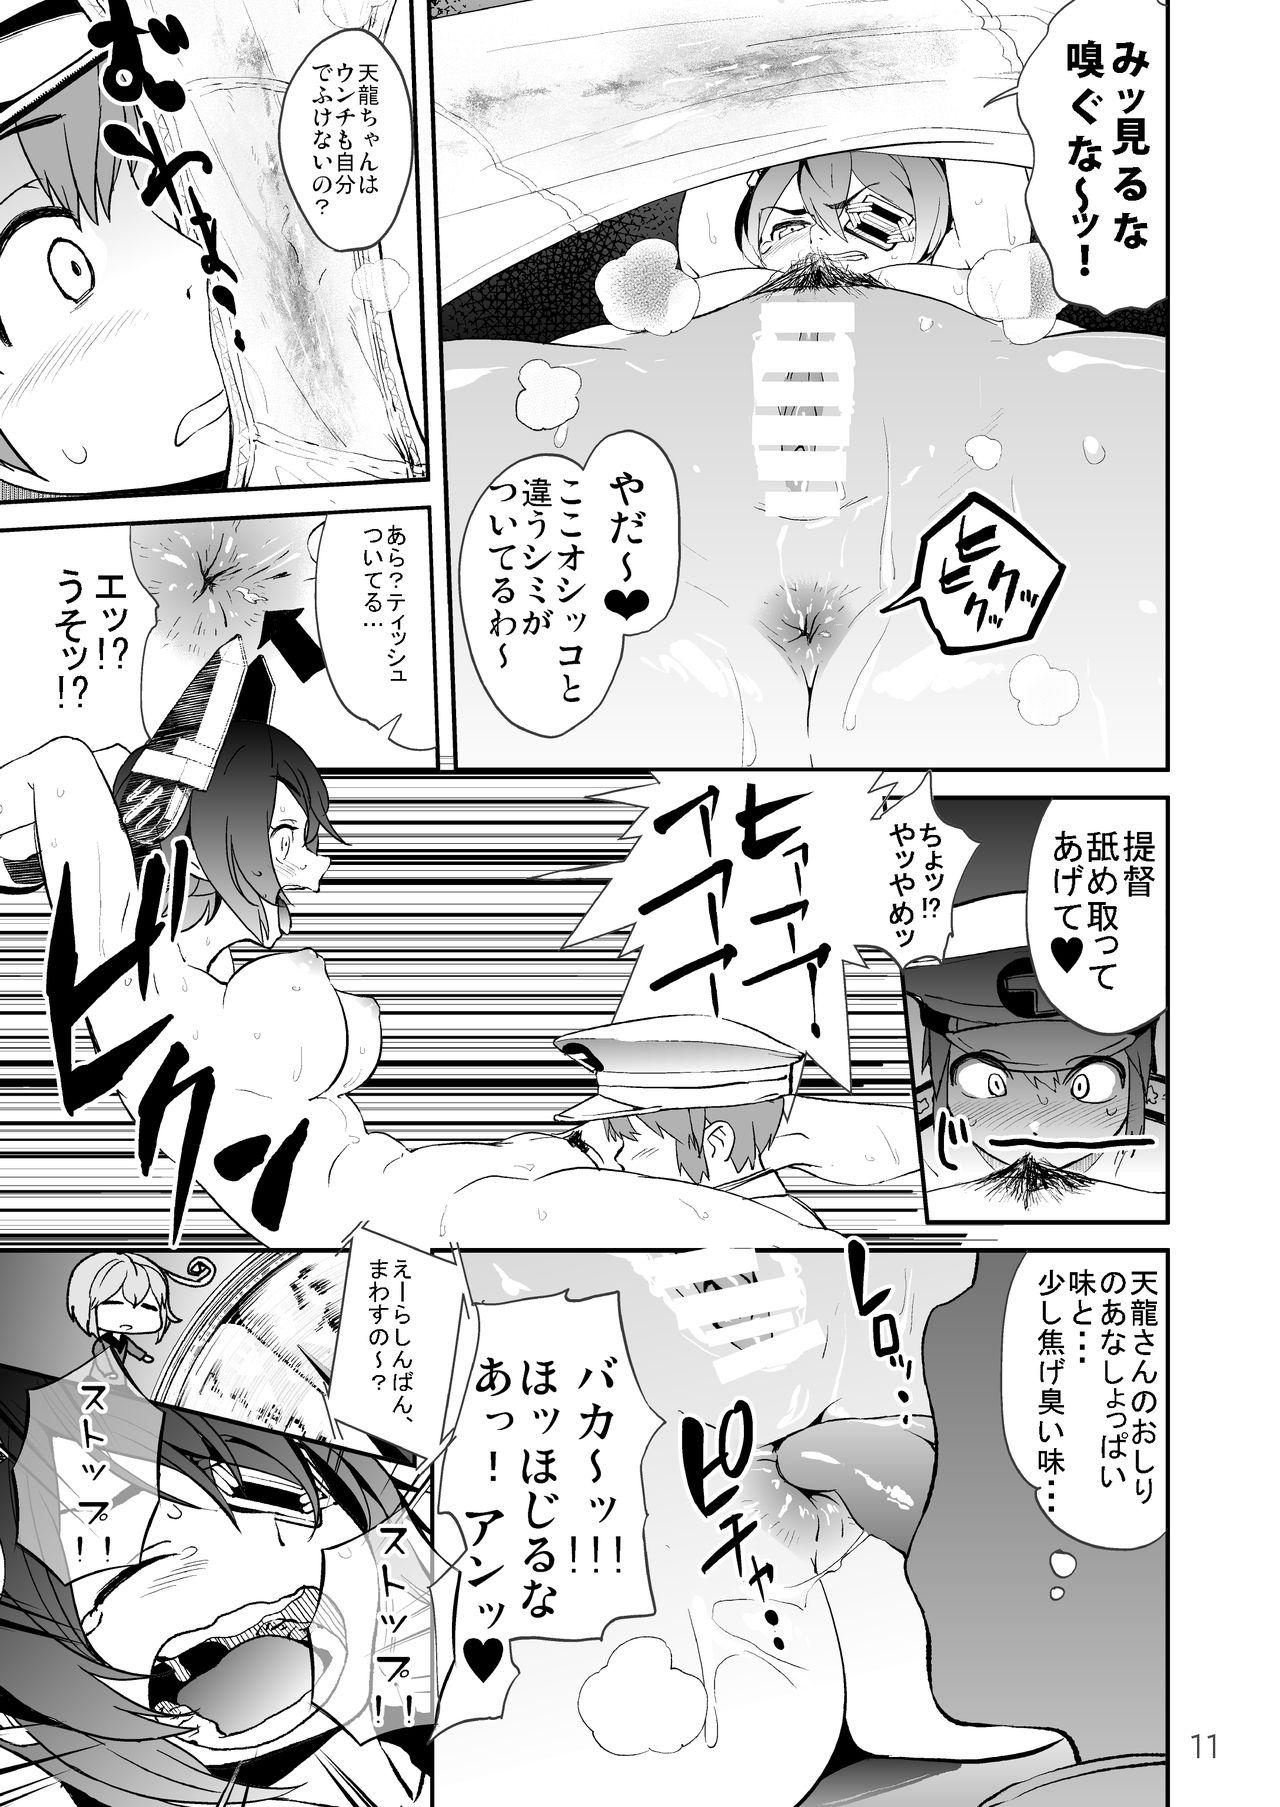 Tits Operation TTT - Kantai collection Cheat - Page 11